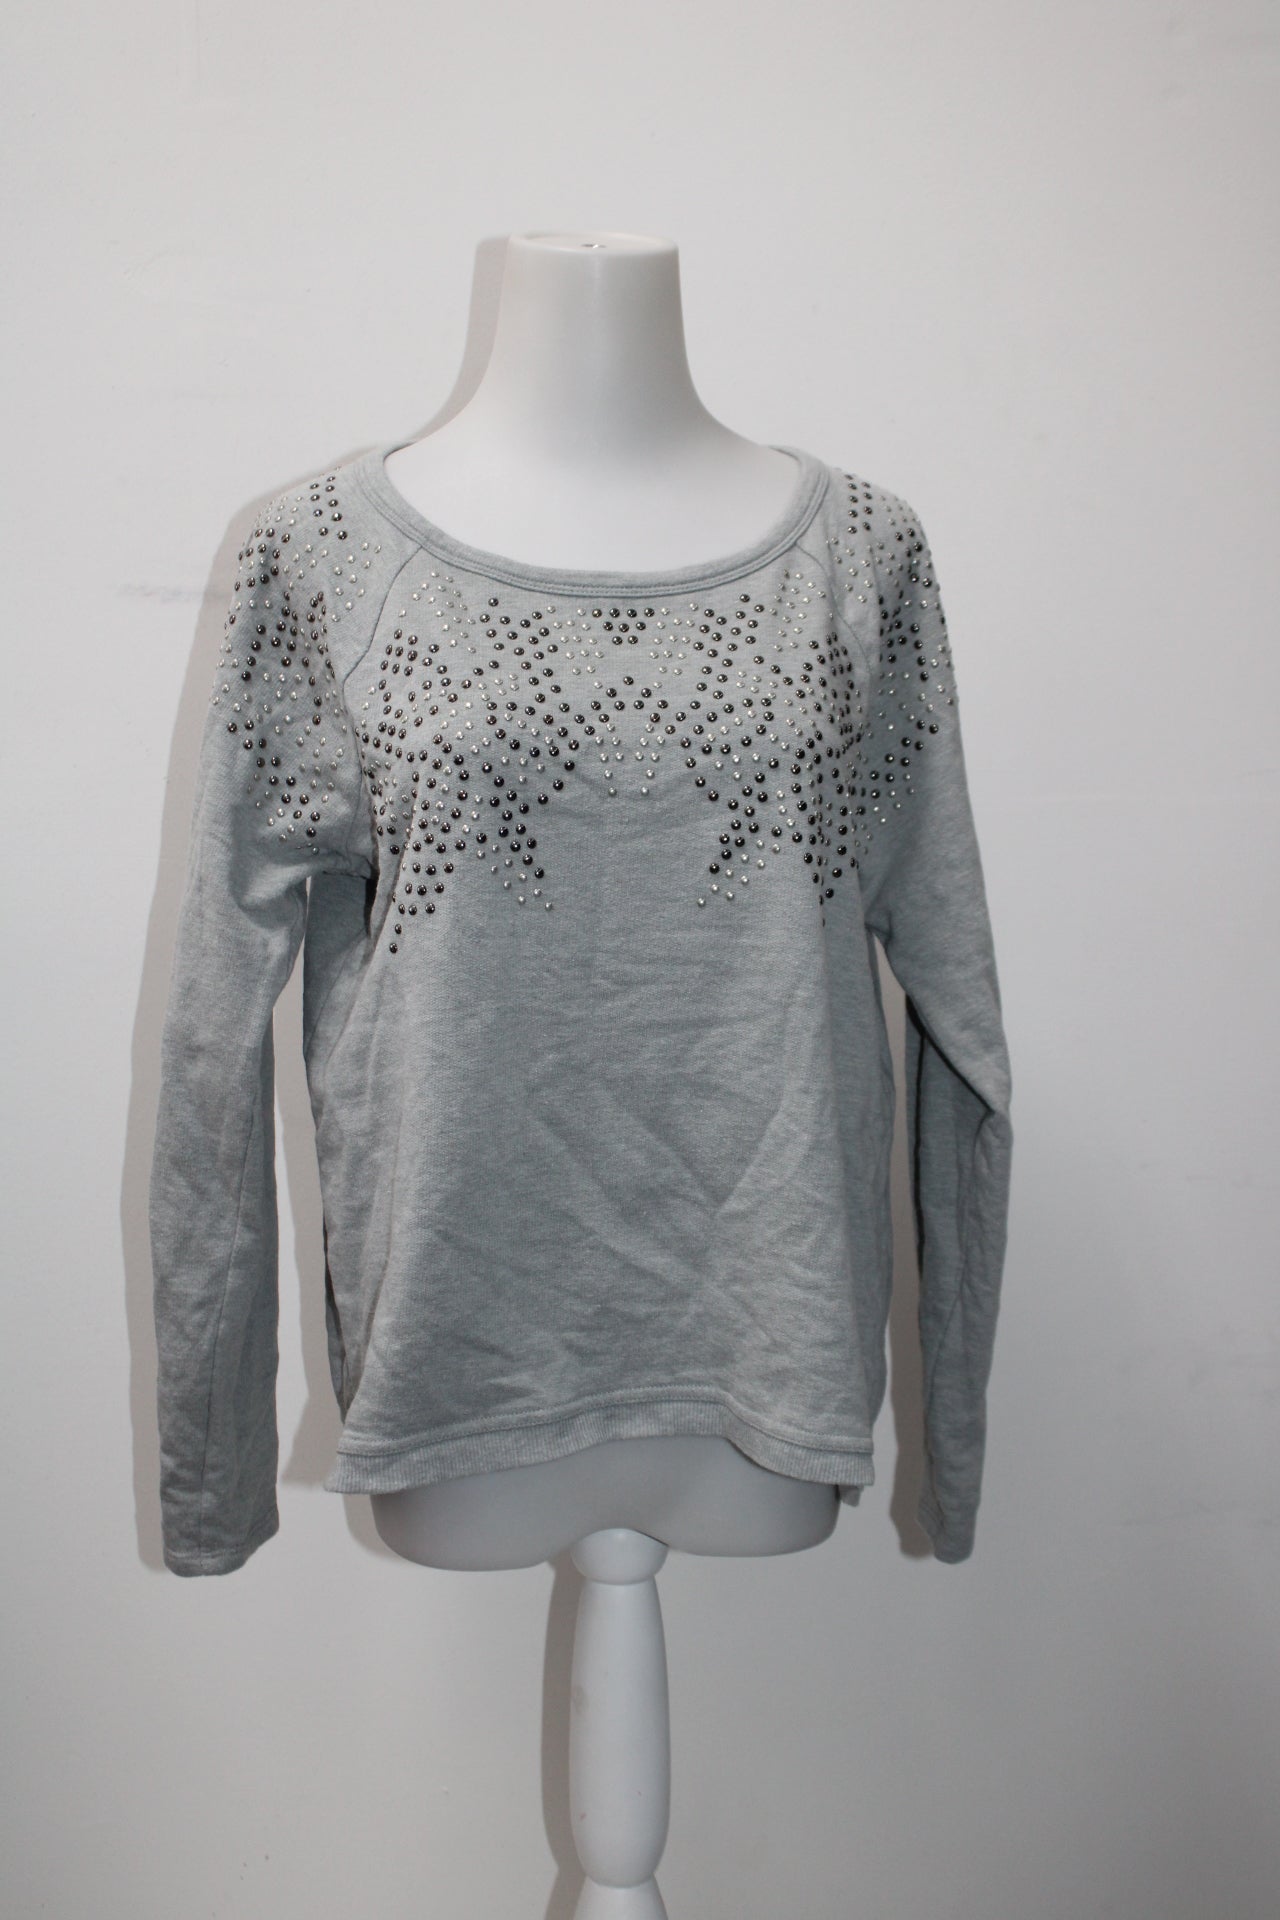 Apt.9 Women's Top Gray PS Pre-Owned